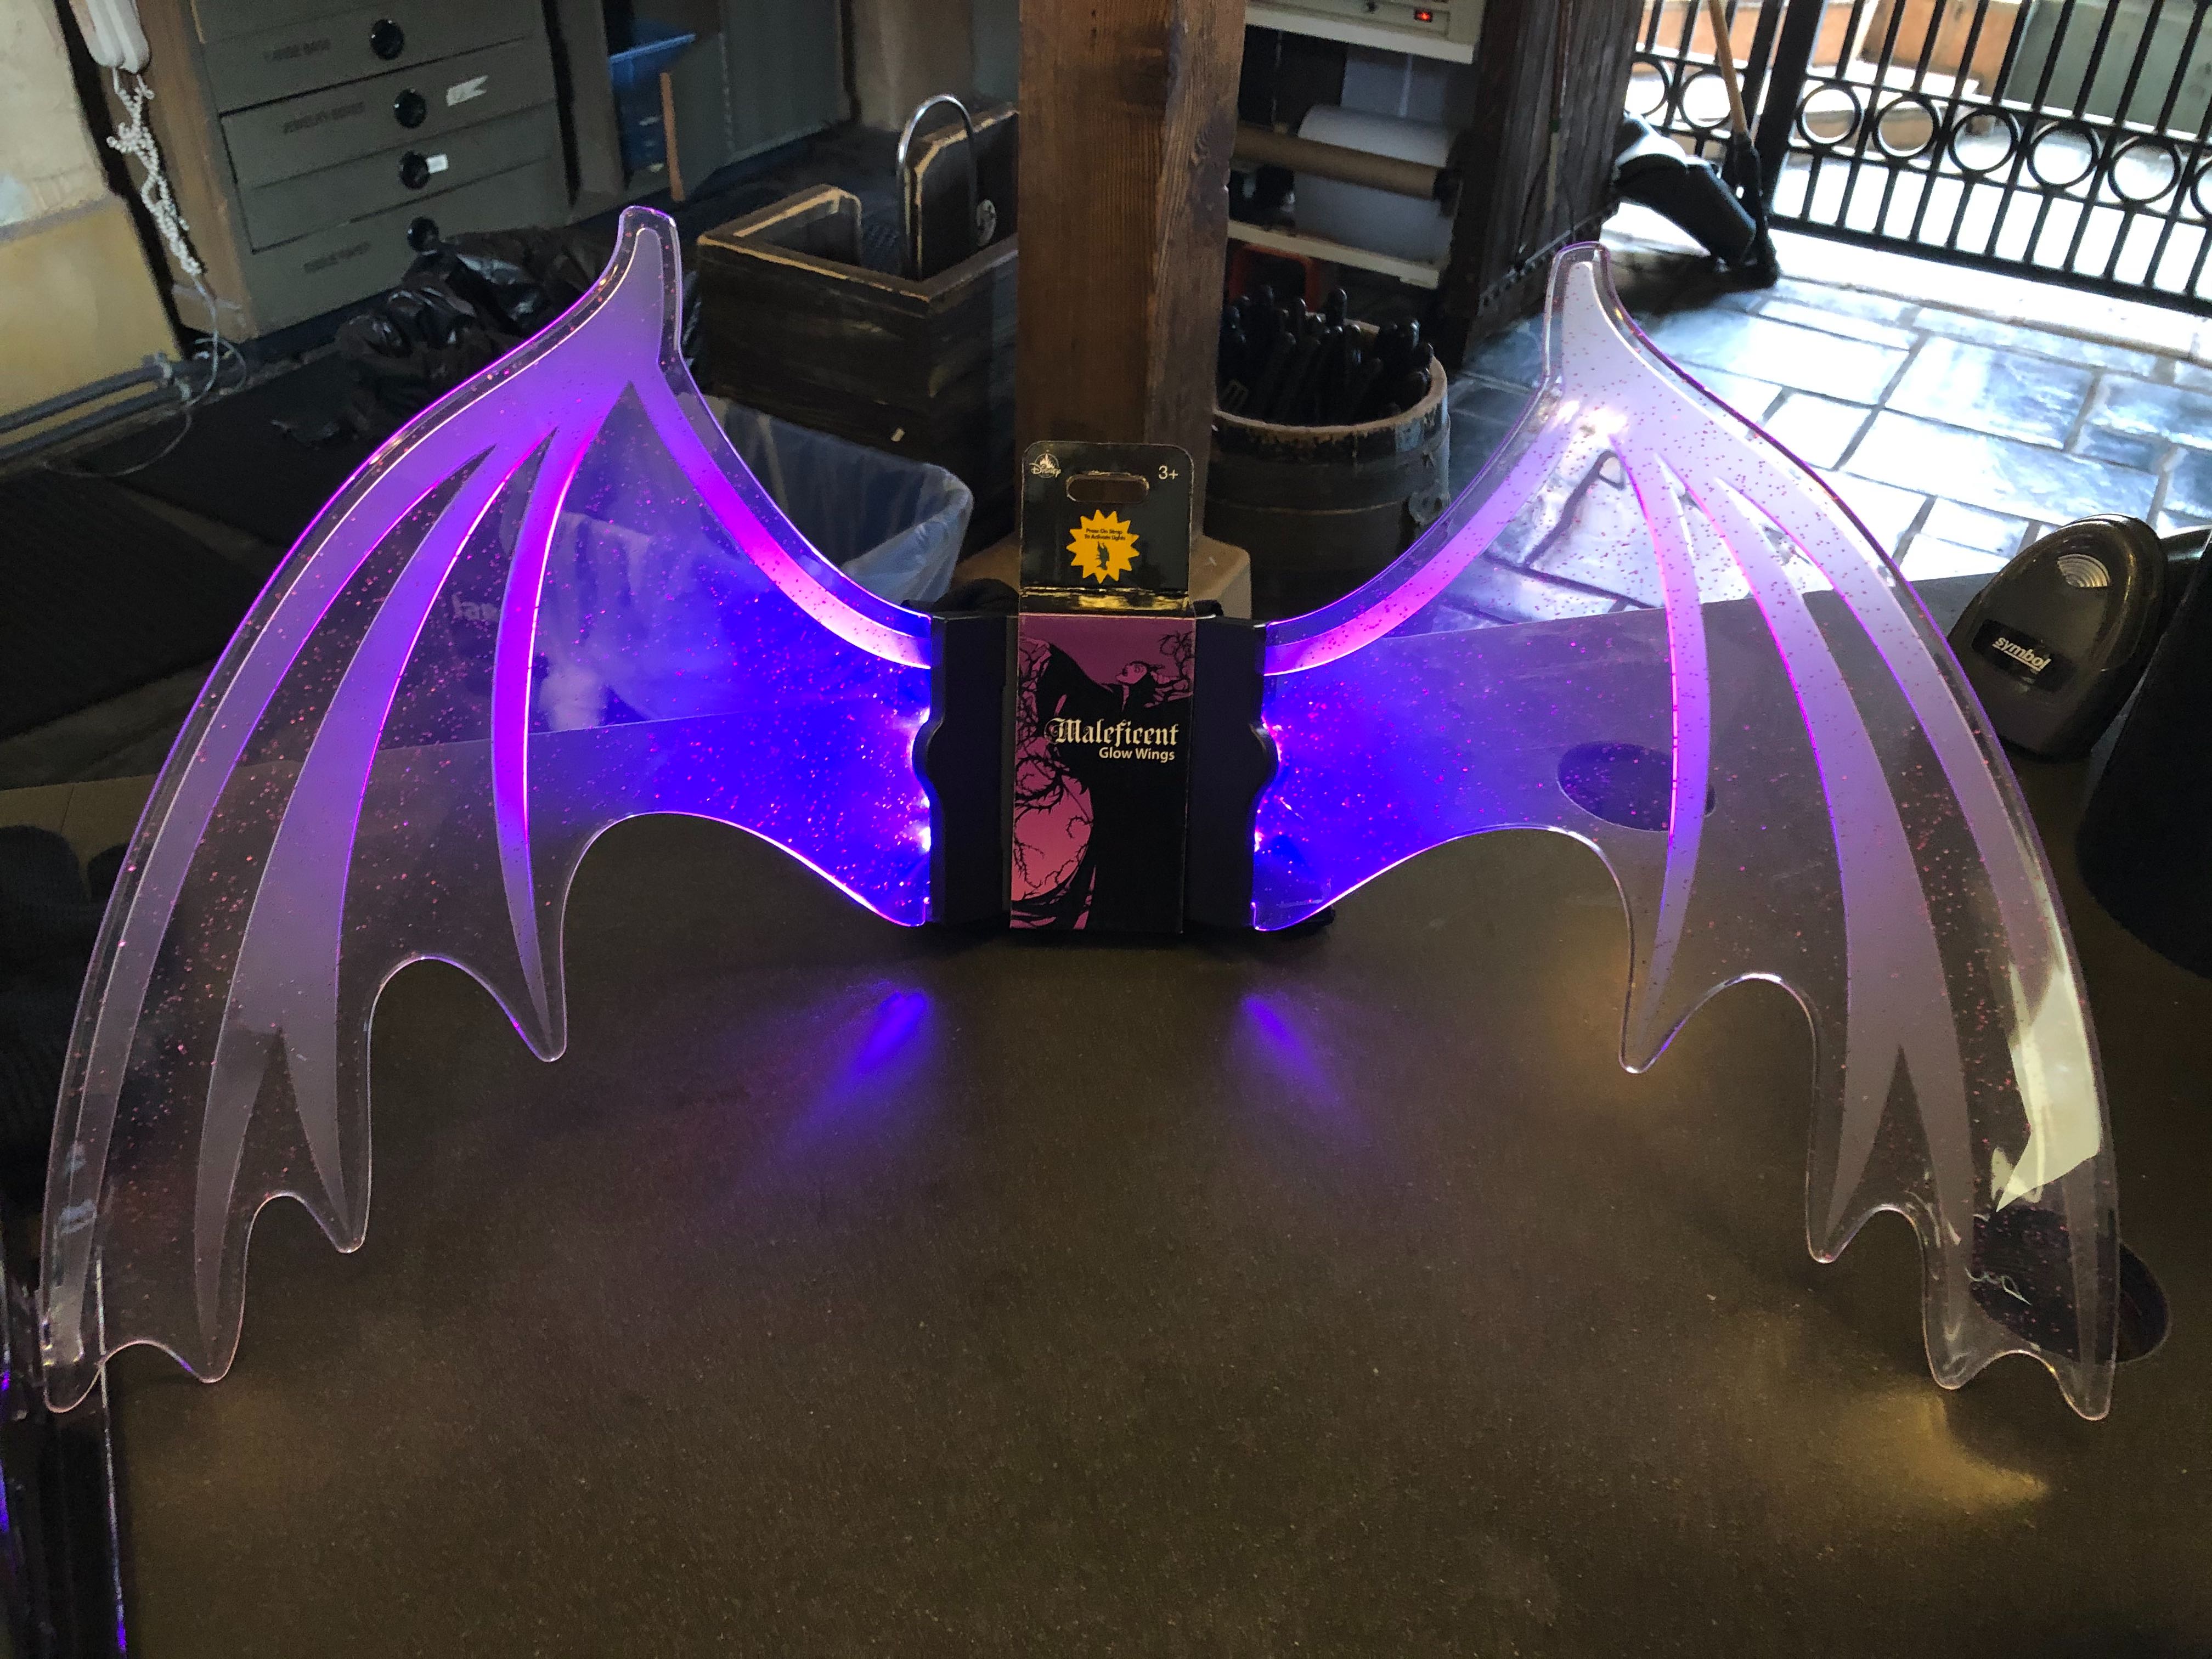 maleficent wings on counter purple